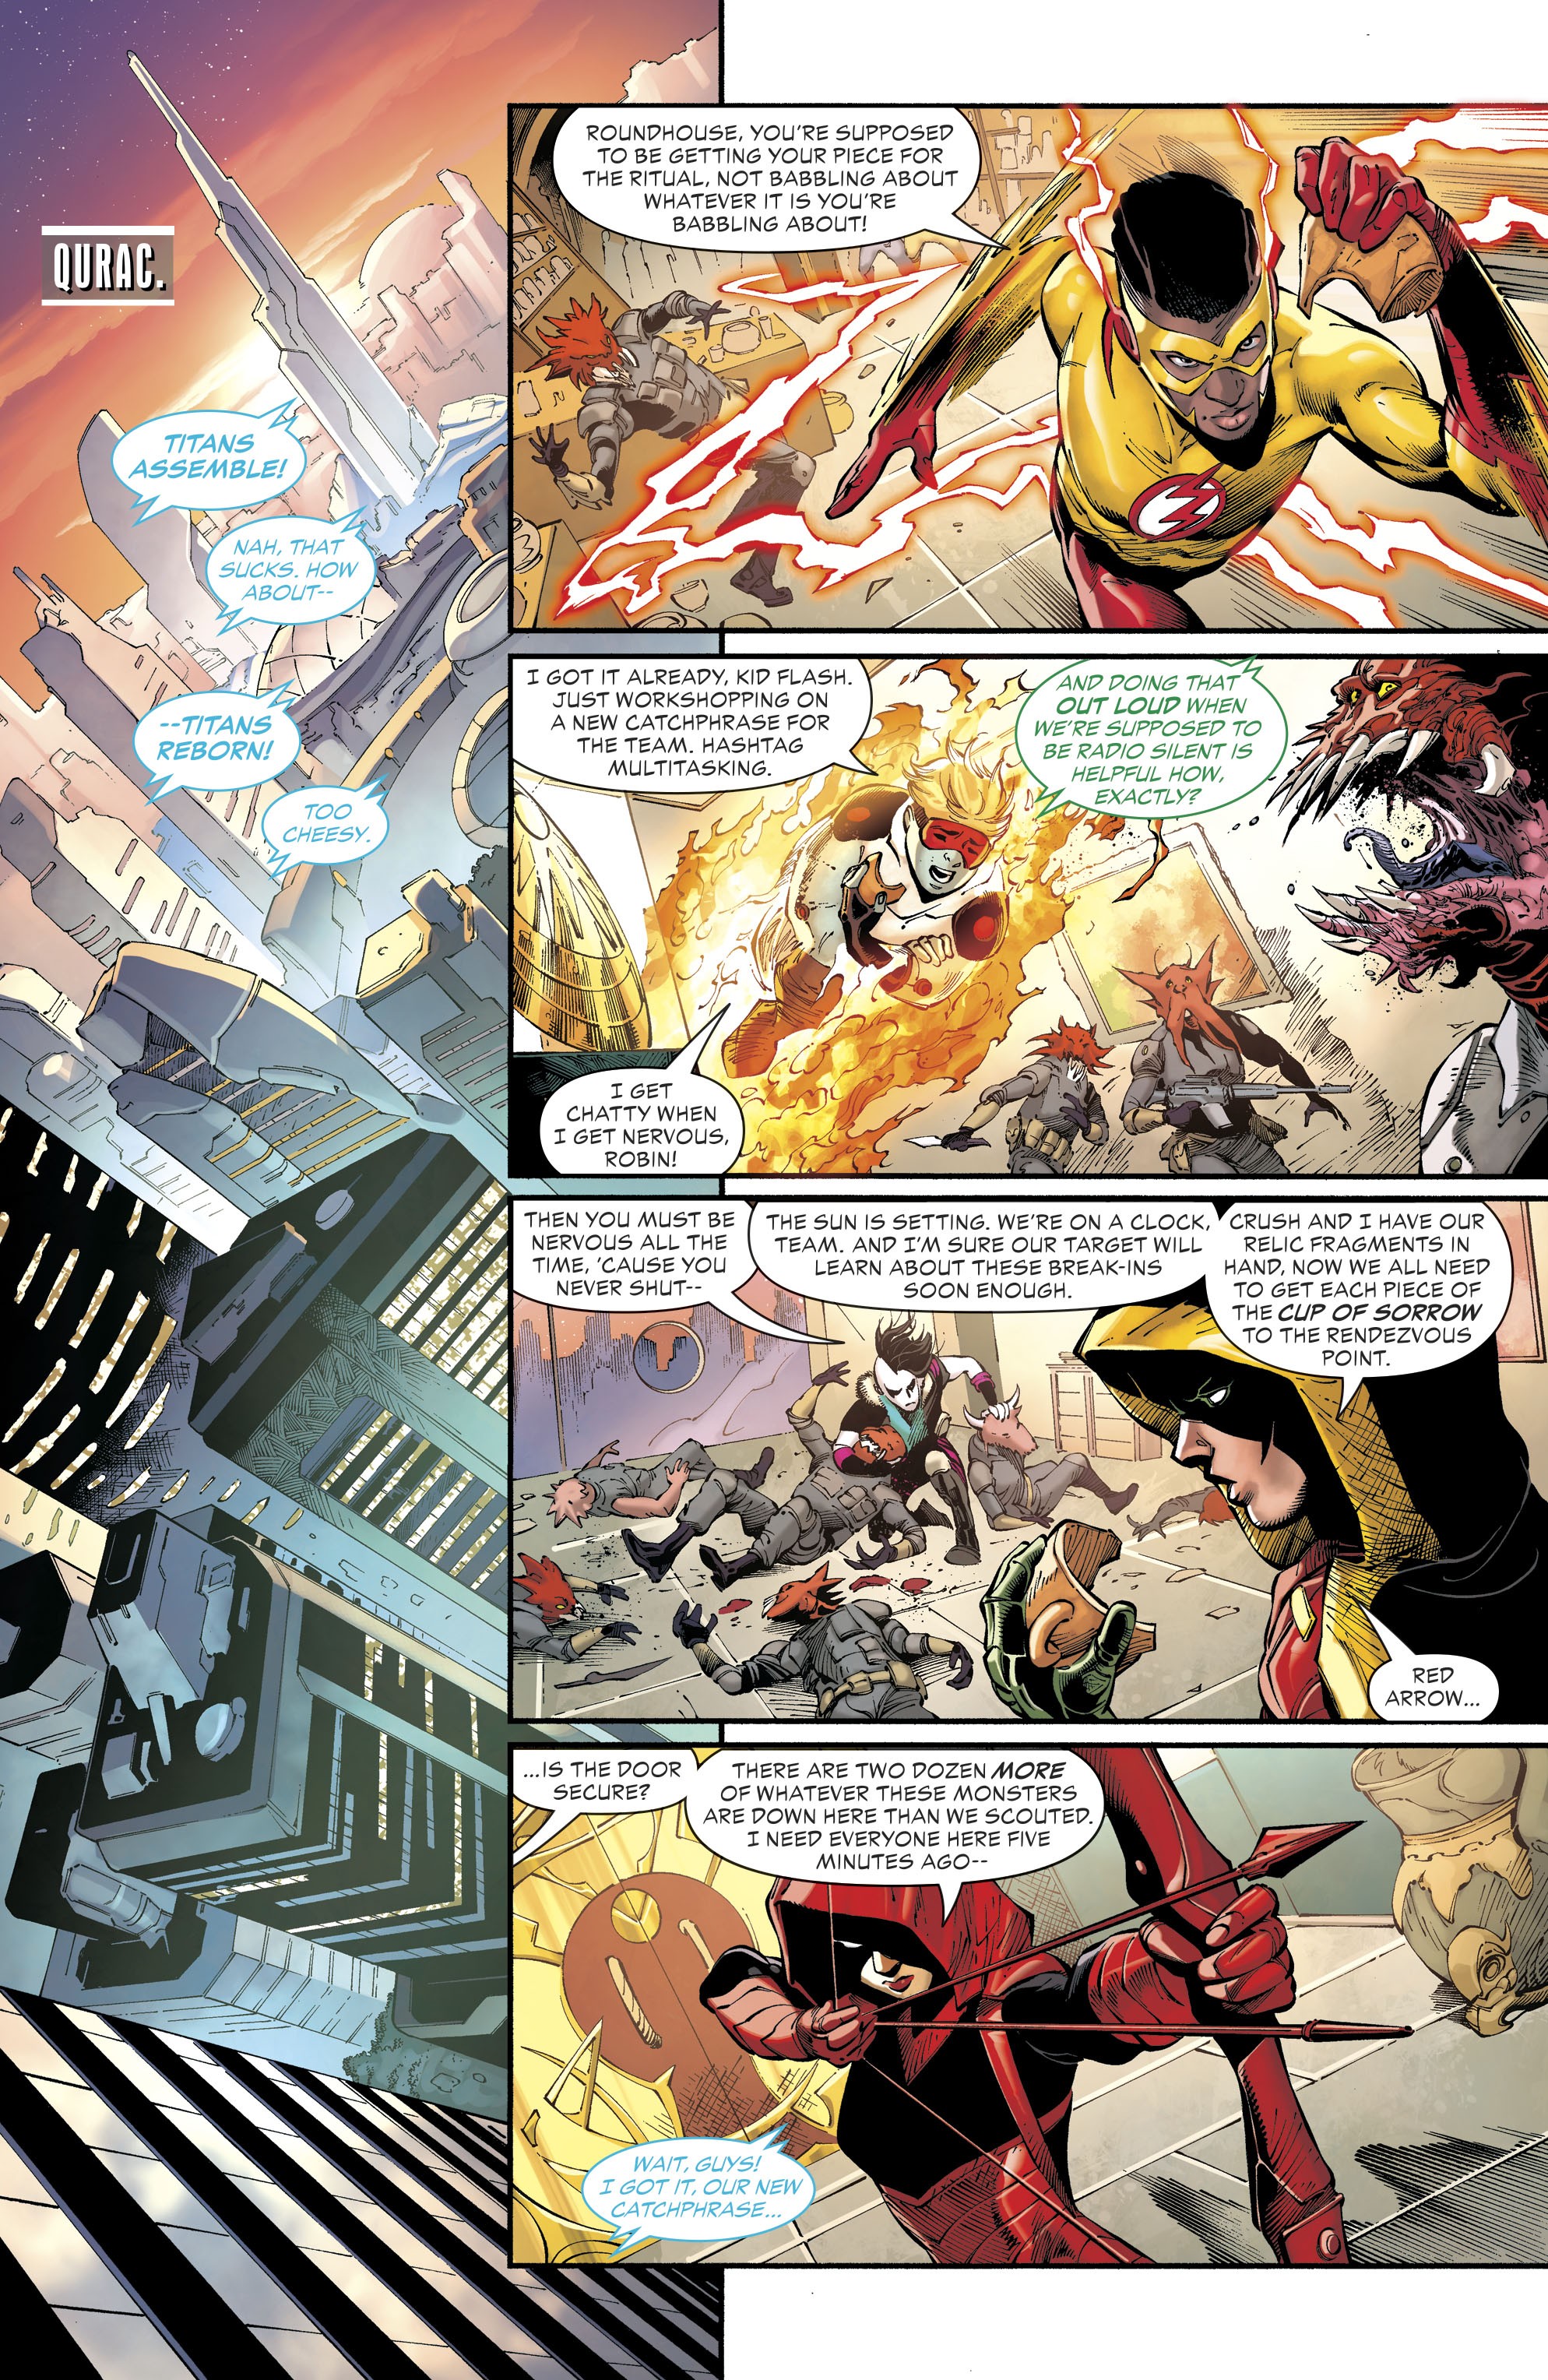 Teen Titans (2016-): Chapter 39 - Page 3